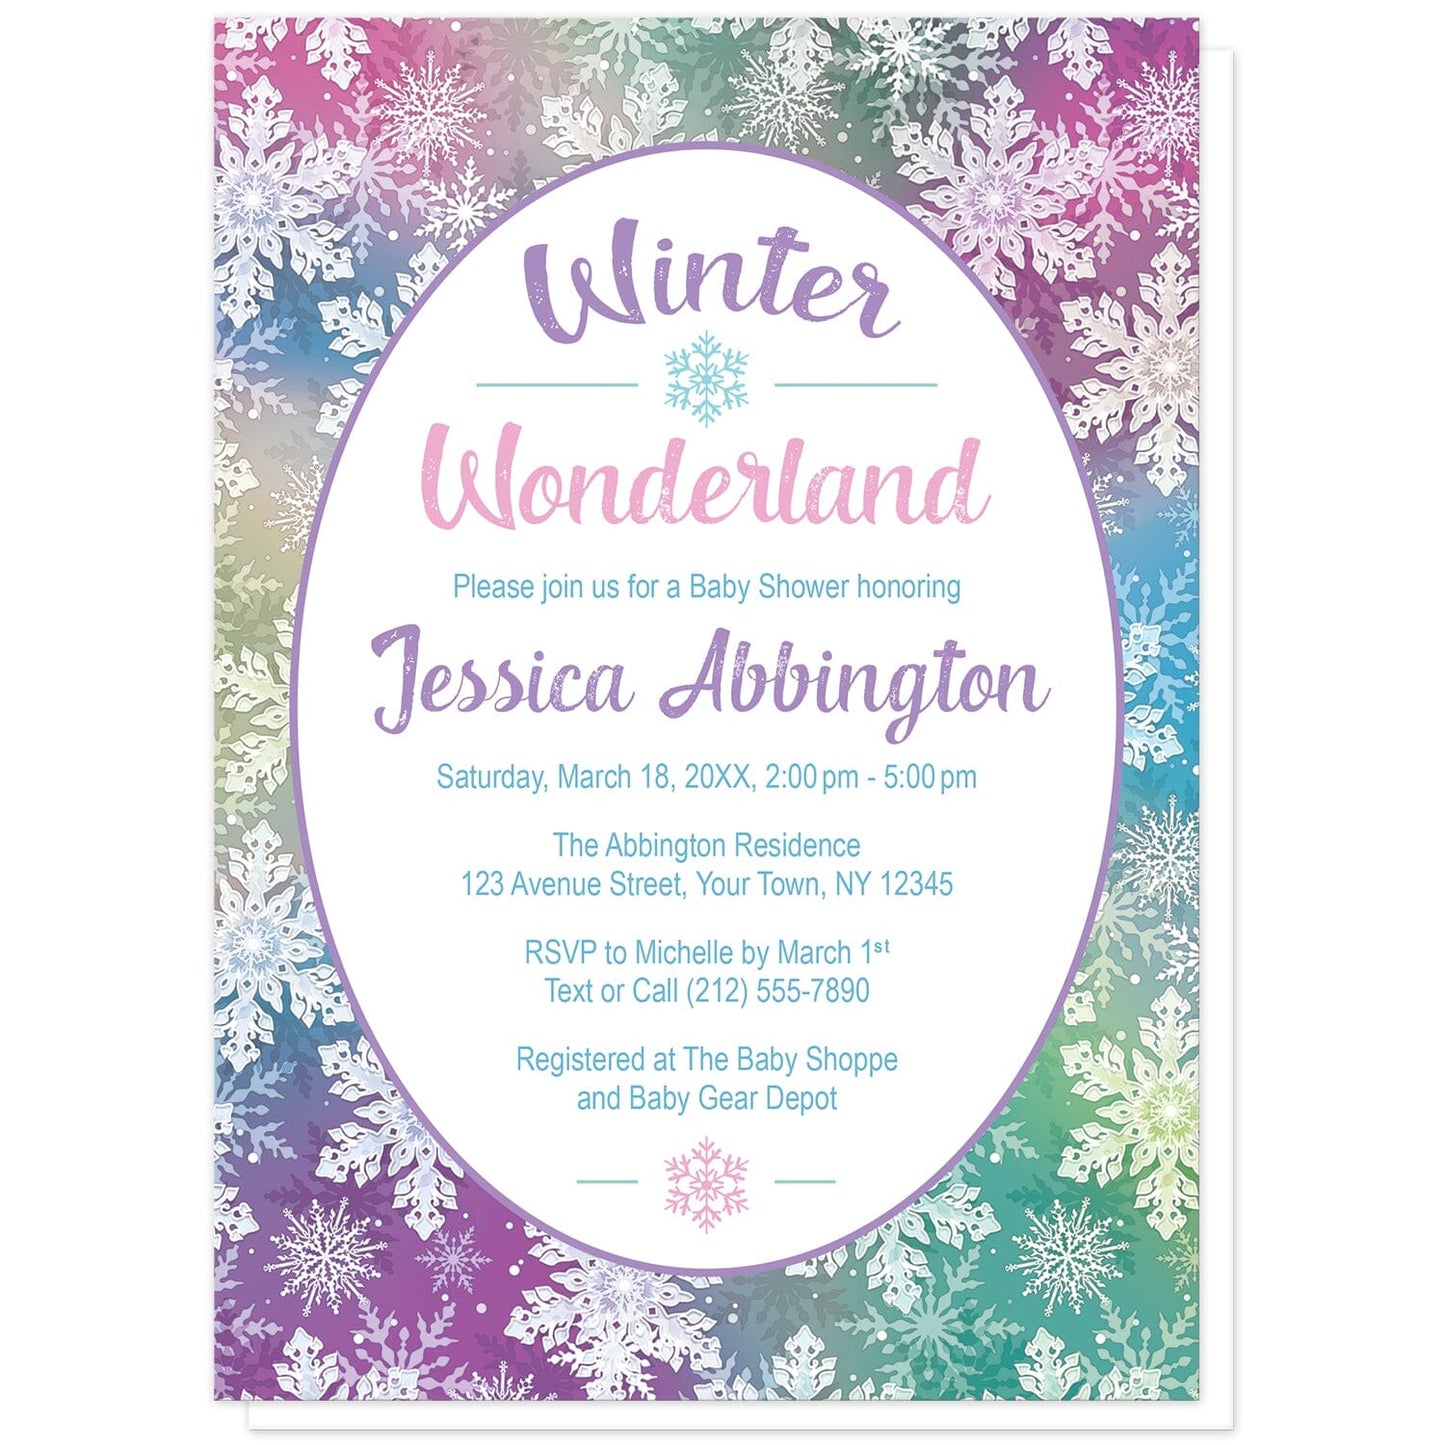 Rainbow Snowflake Winter Wonderland Baby Shower Invitations at Artistically Invited. Rainbow snowflake Winter Wonderland baby shower invitations designed with your personalized baby shower details custom printed in colorful text in a white oval frame design over a beautiful and ornate rainbow snowflake pattern with white snowflakes over a multicolored background.